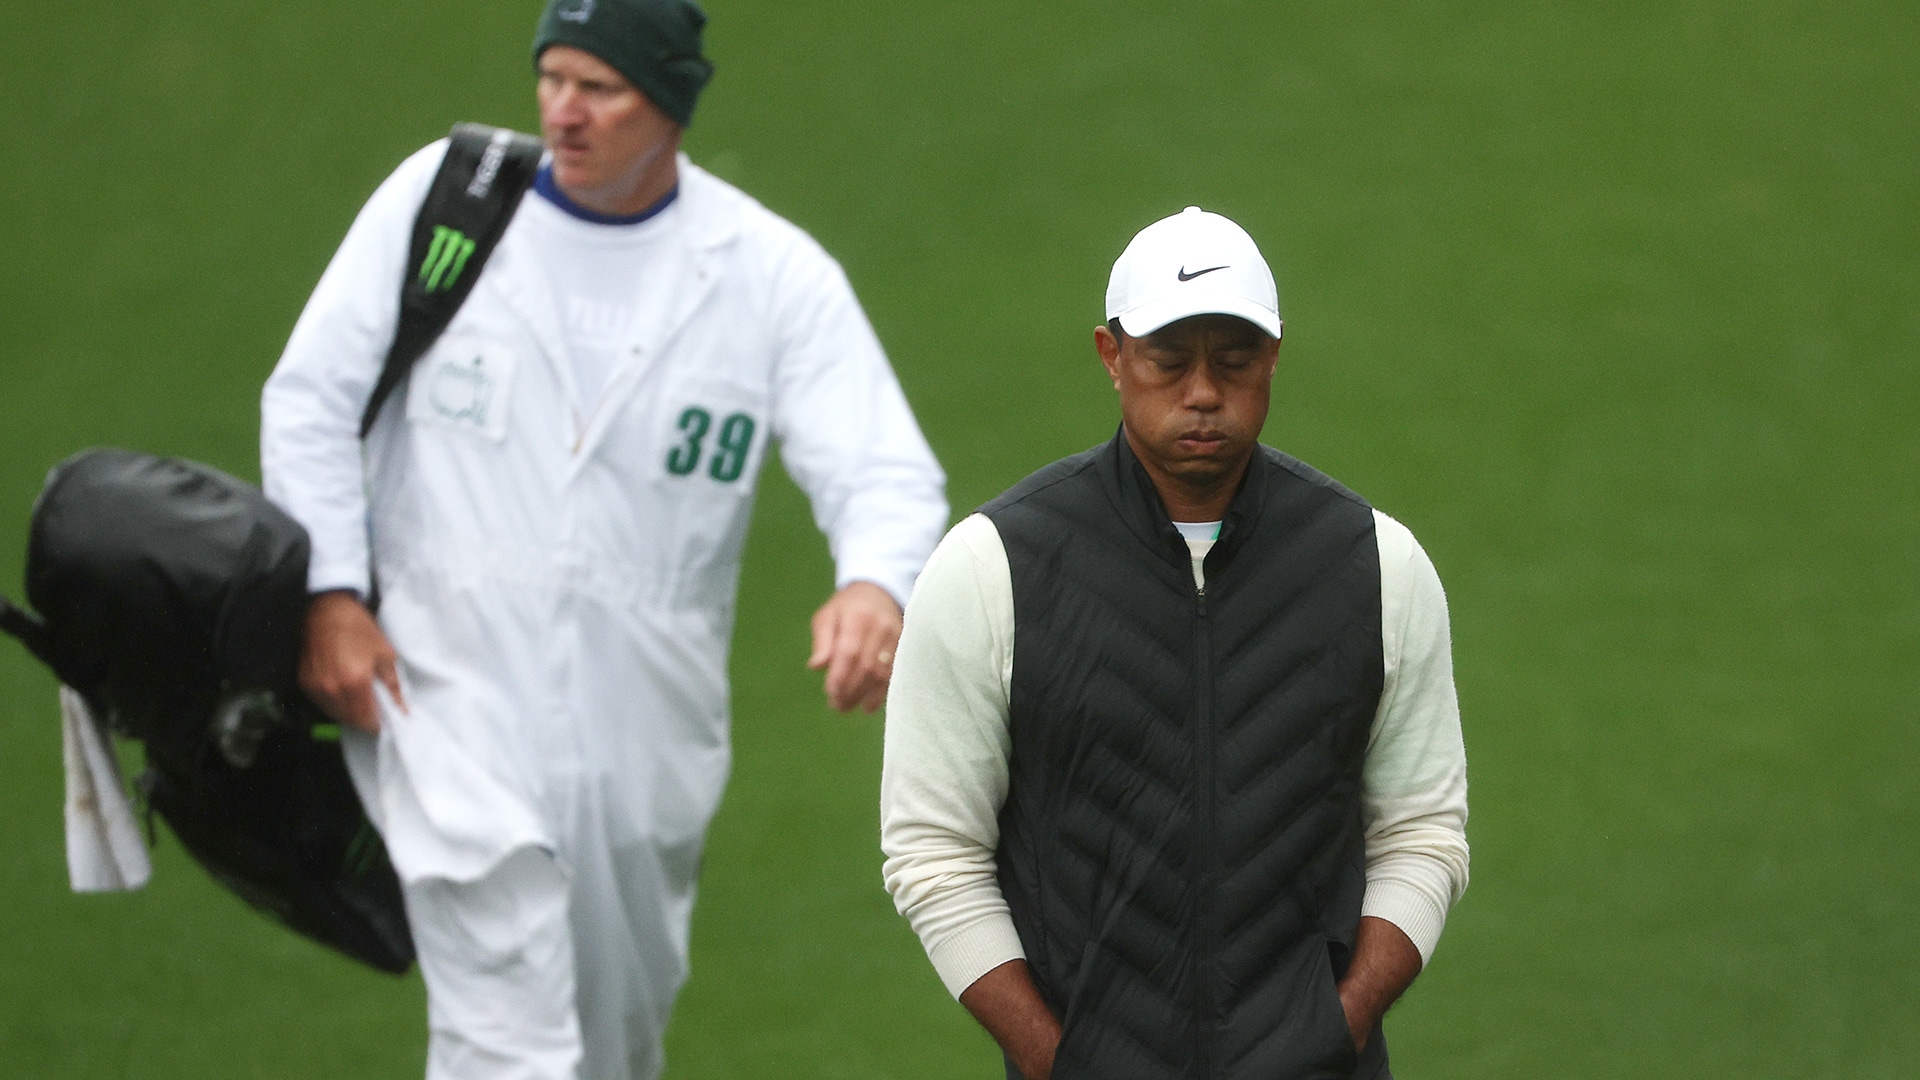 Tiger Woods withdraws before Sunday restart at Masters